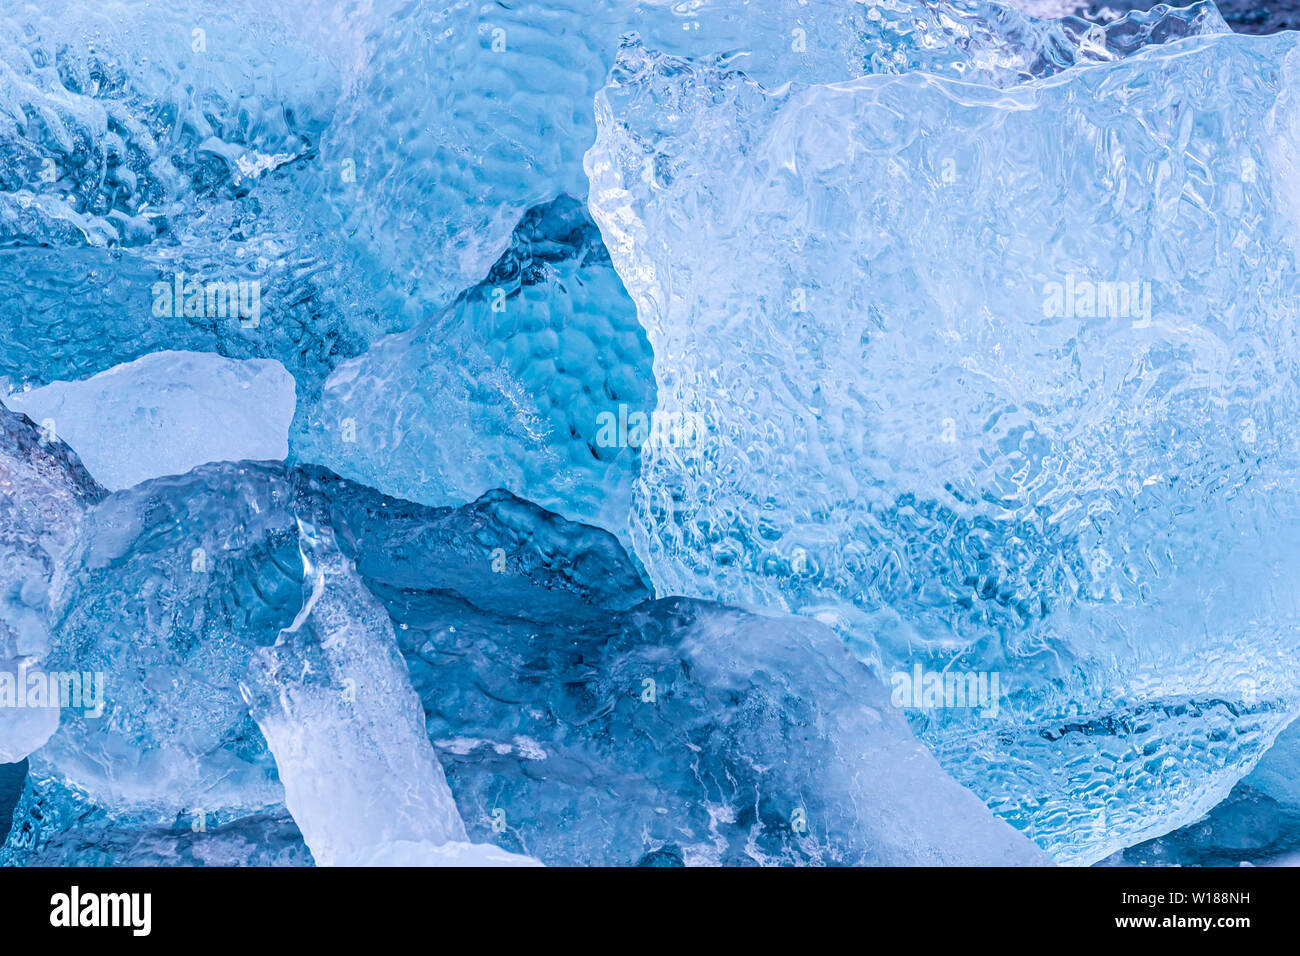 Details of iceberg fragments floating in the arctic sea. Blue glacial ice calved from the g;aciers of Svalbard, a Norwegian archipelago between mainla Stock Photo